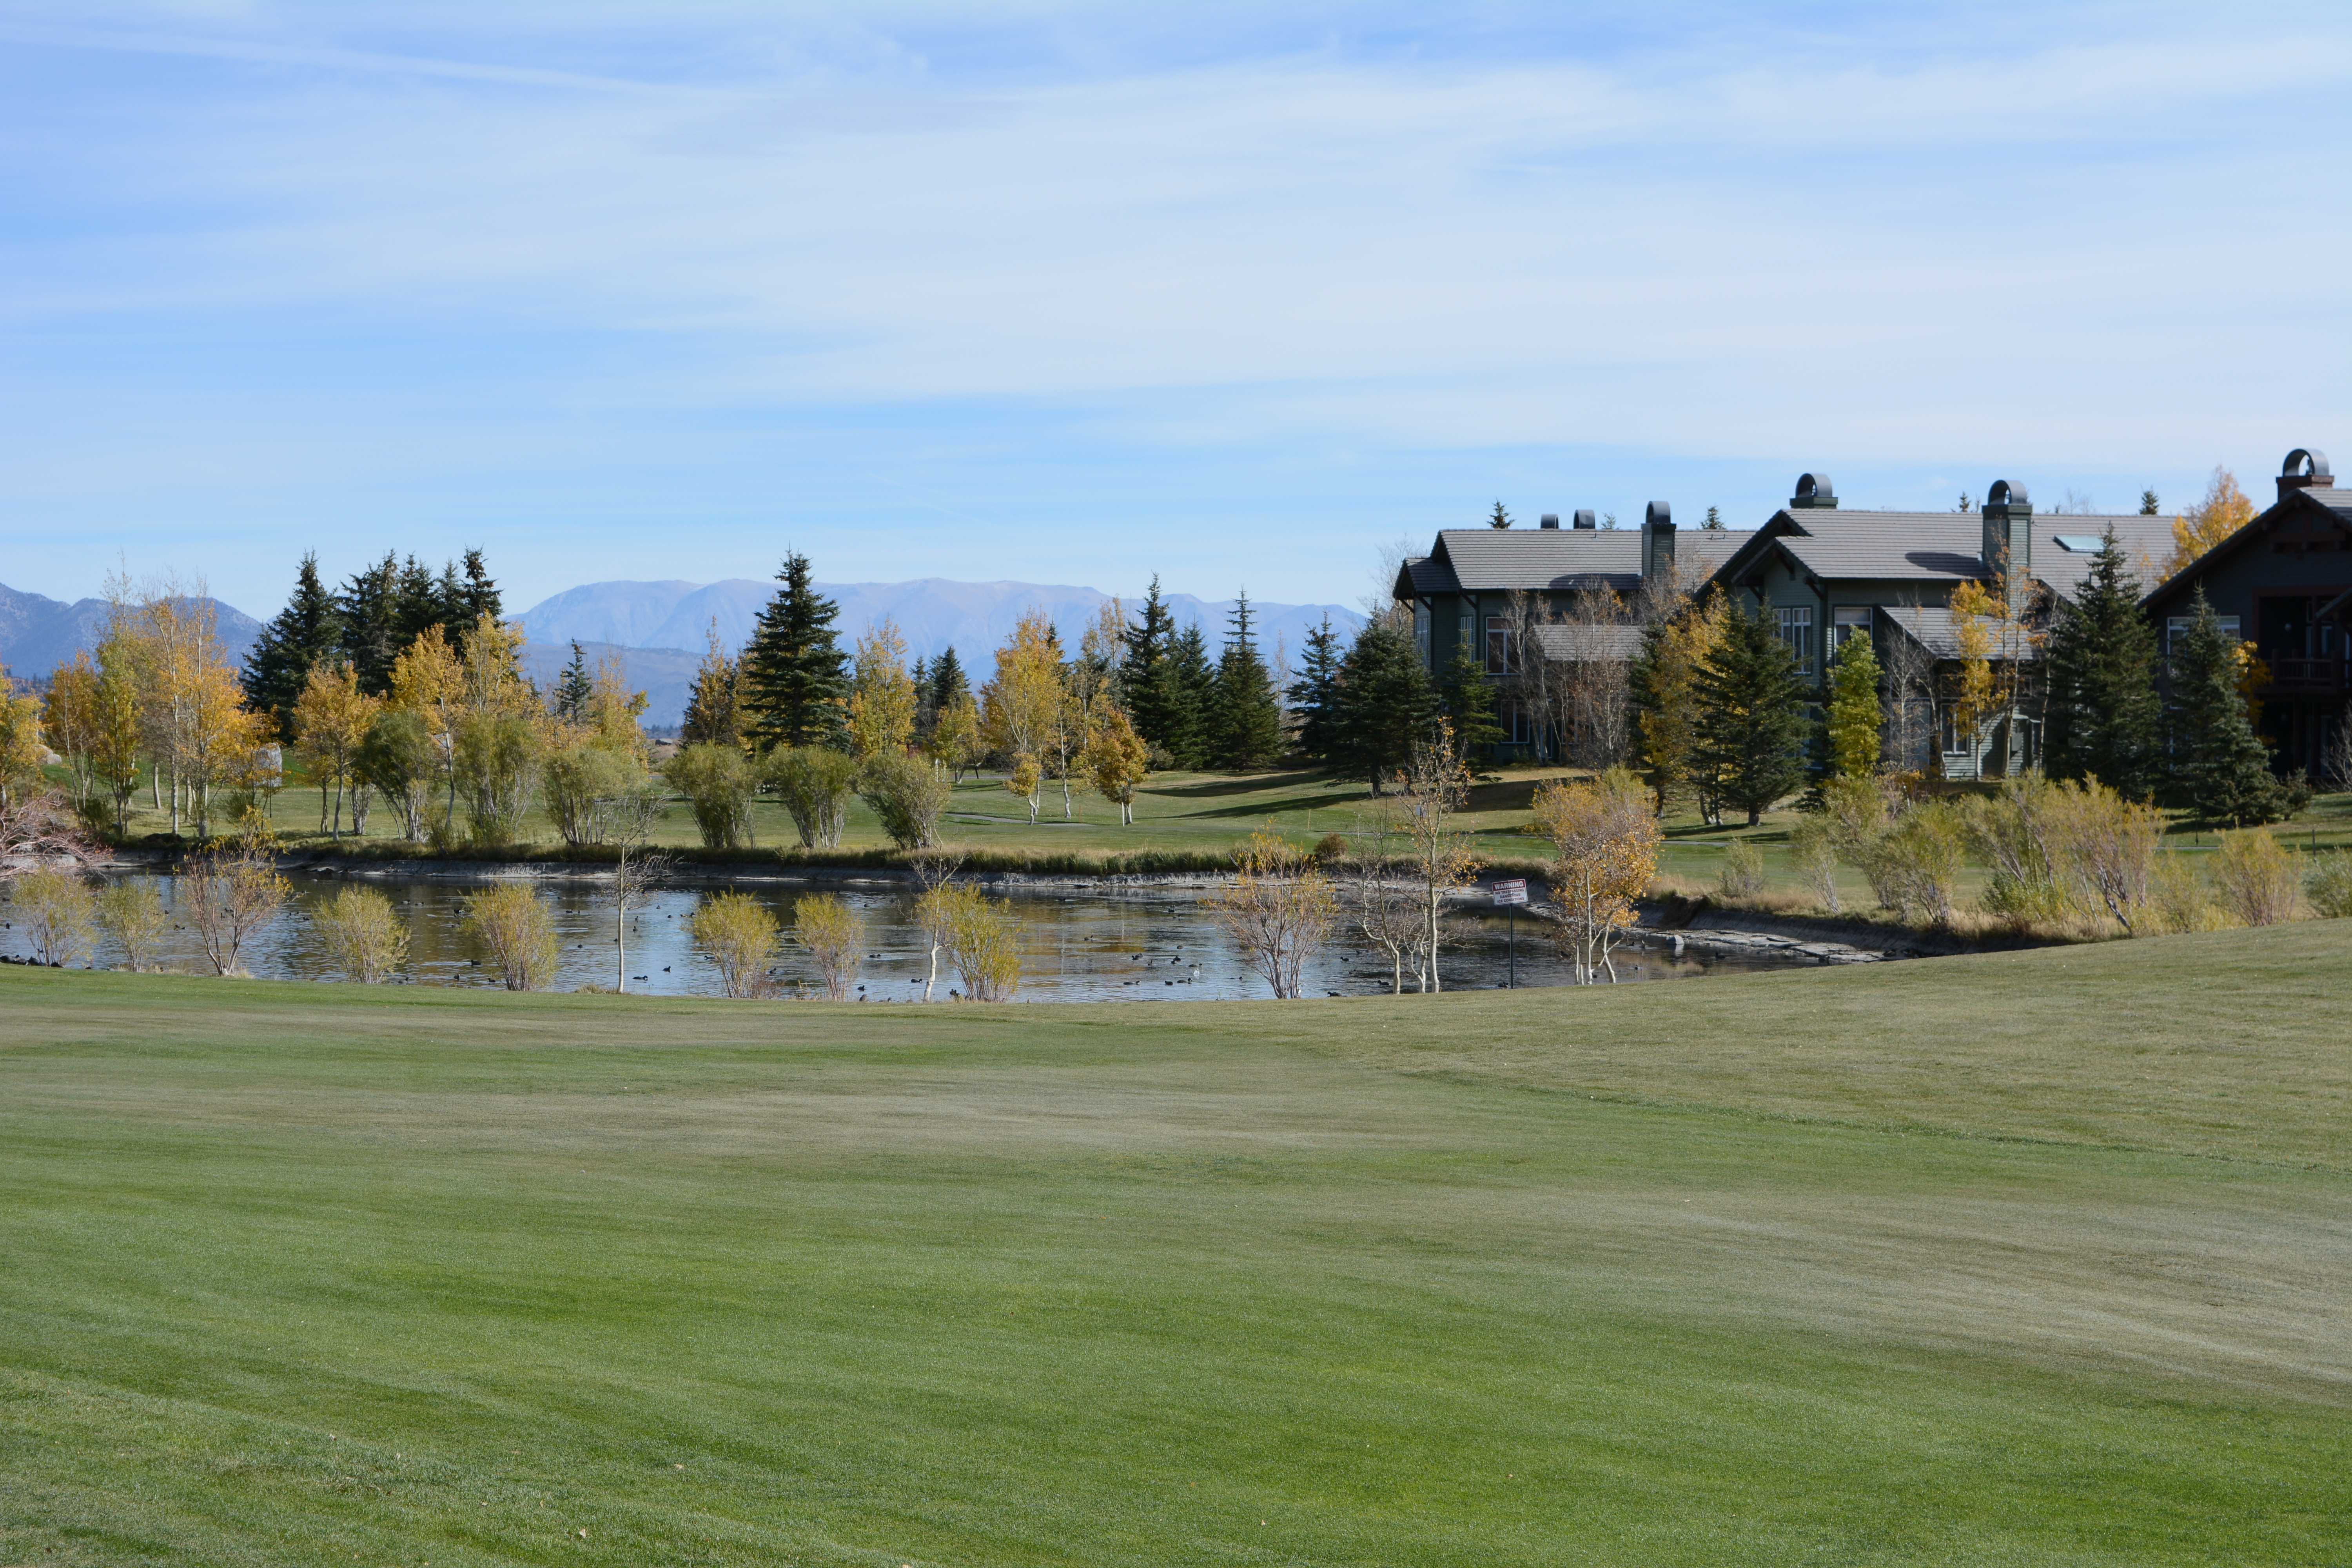 Snowcreek V Condos from golf course in summer